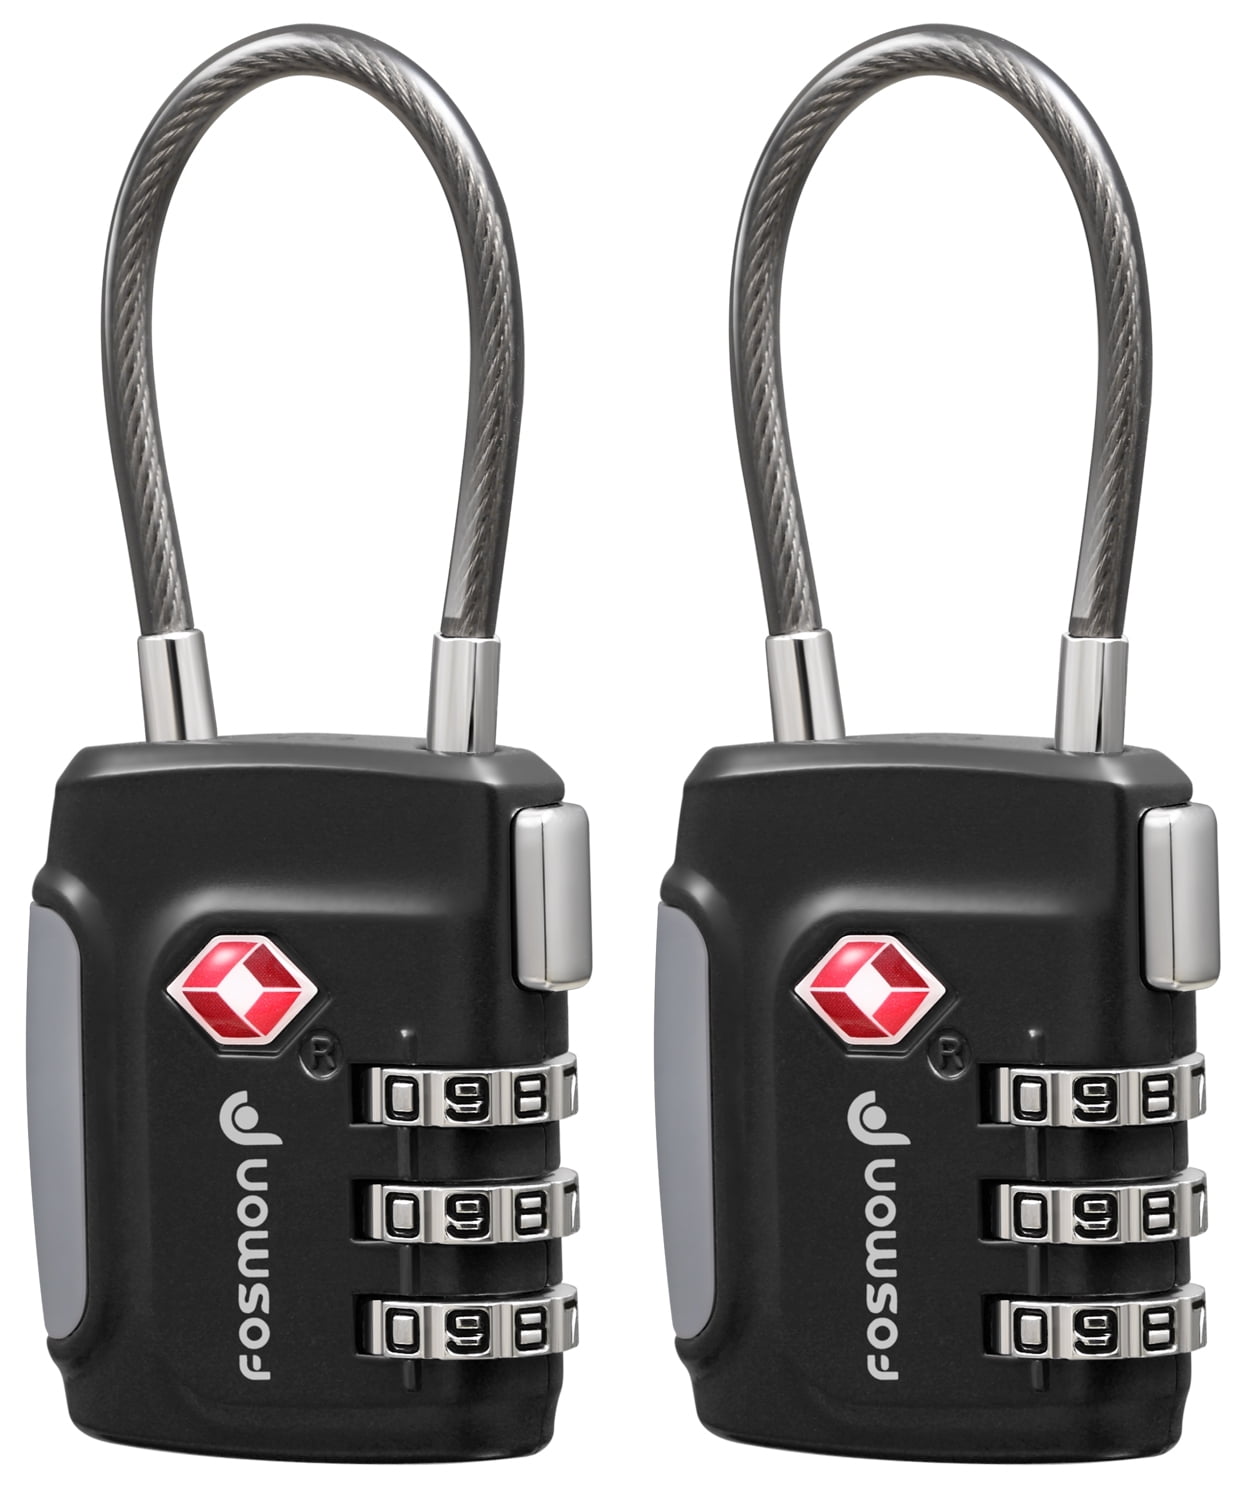 TSA Approved Cable Luggage Locks Re-settable Combination with Alloy Body 2 Pack Red Bright Colors 